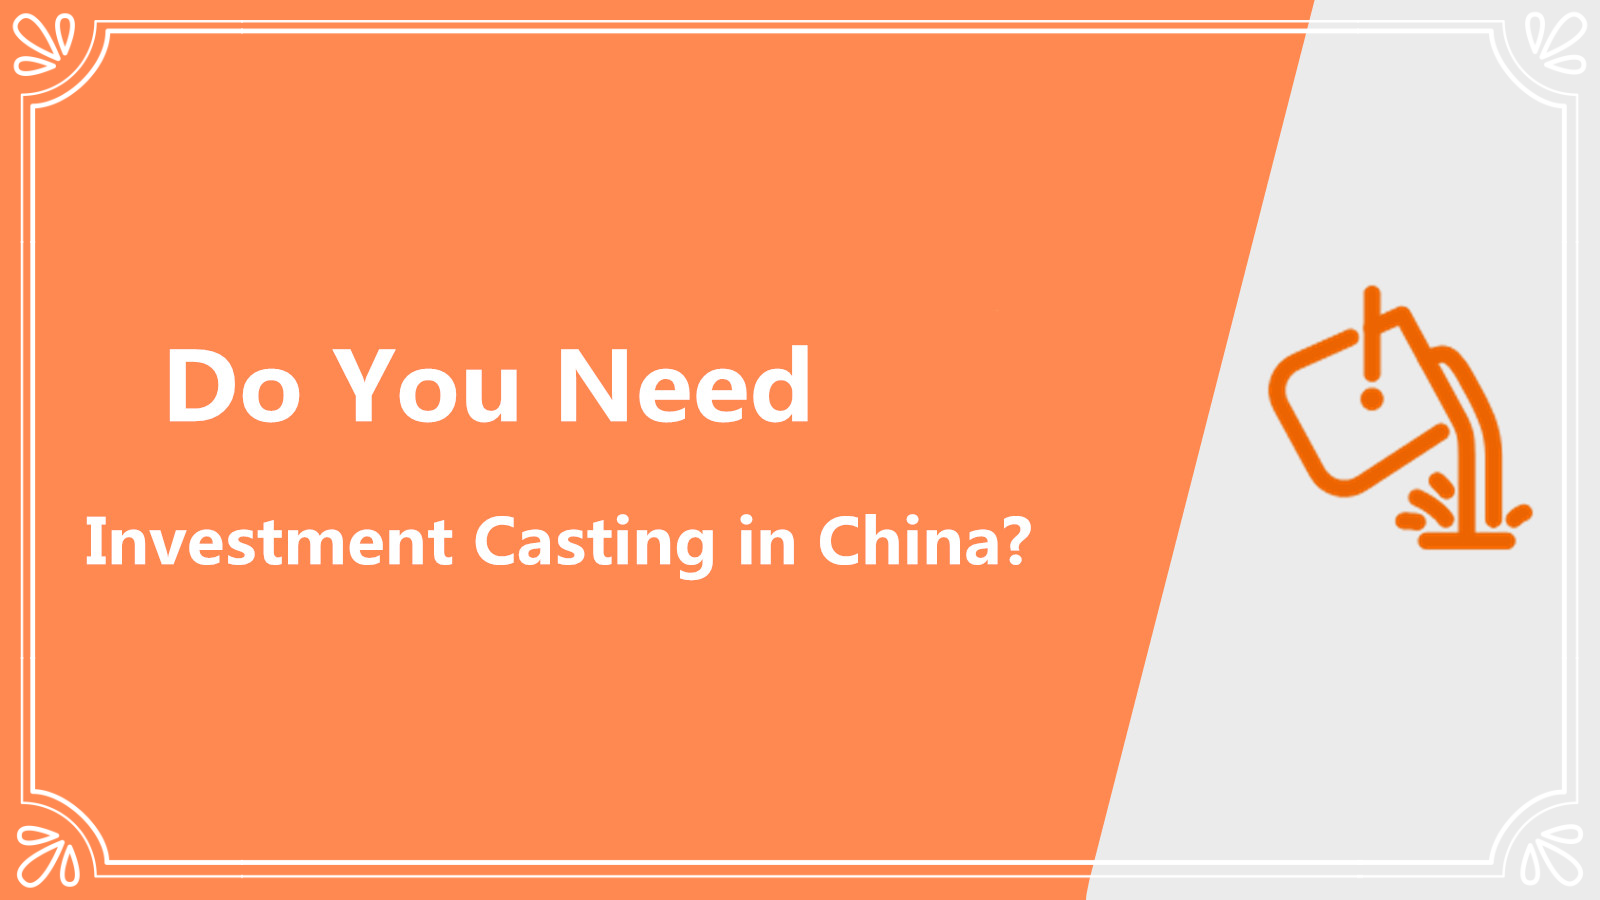 Do You Need Investment Casting in China?